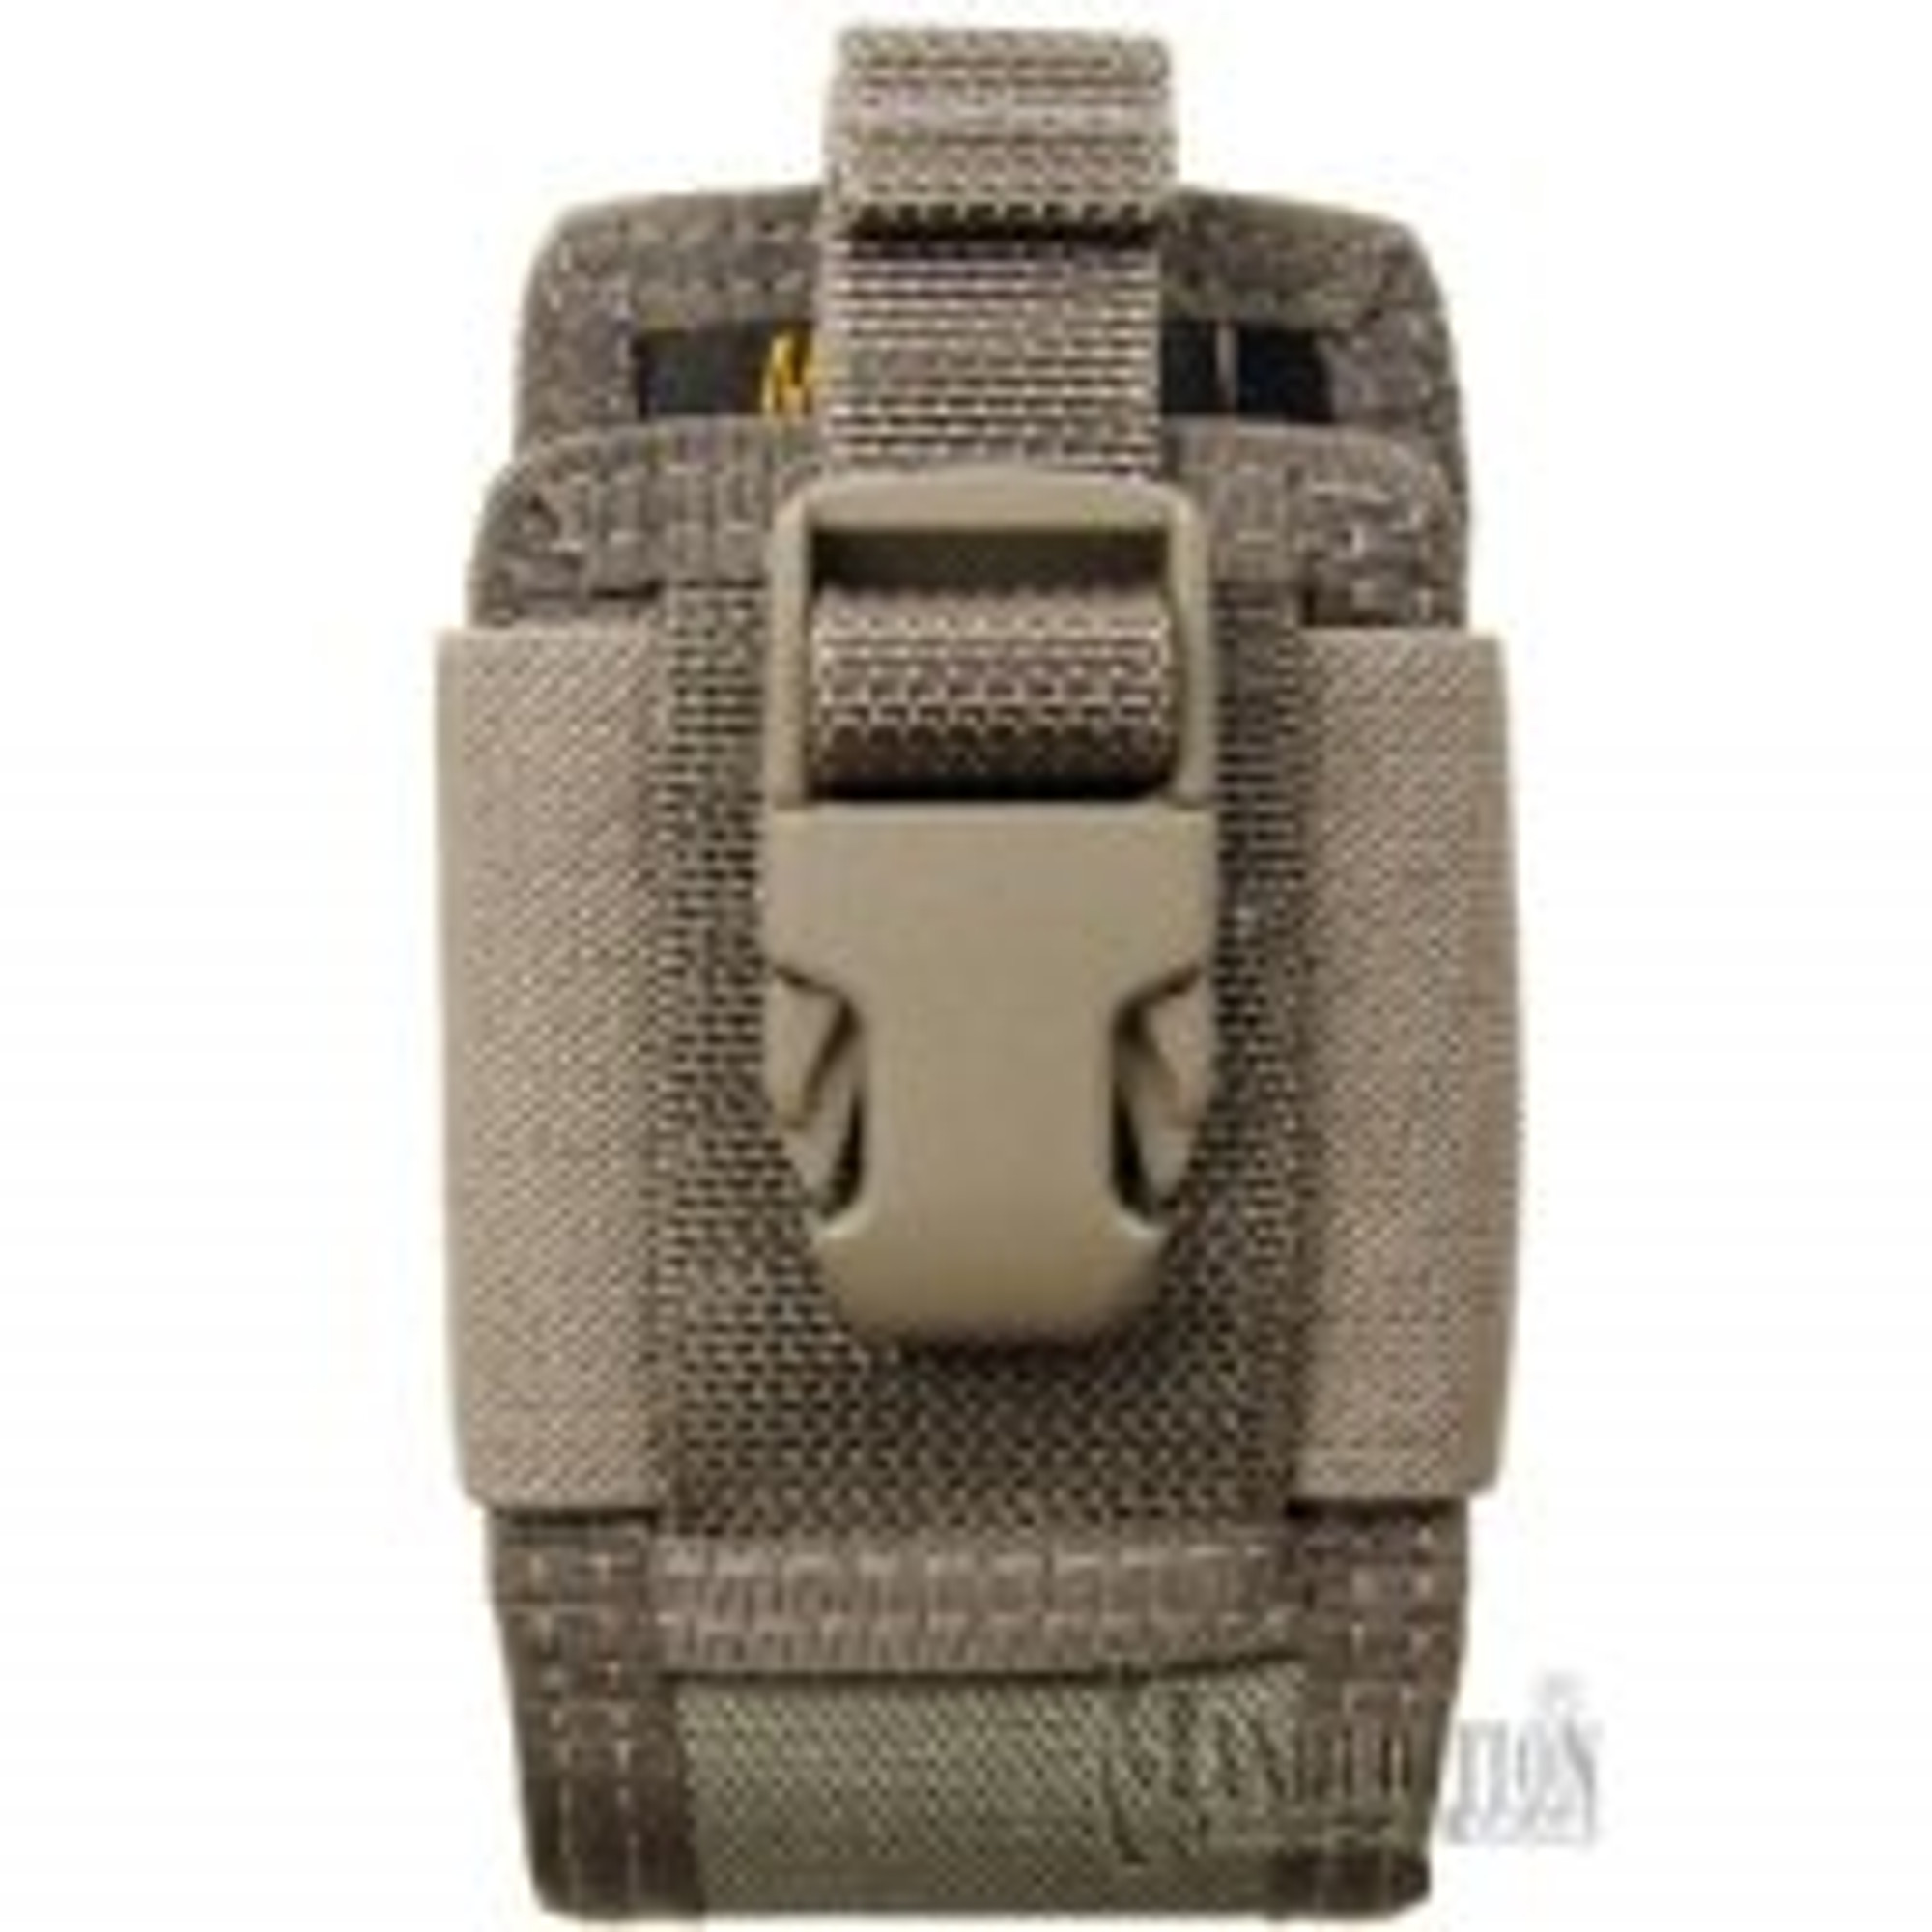 Maxpedition 3.5" Clip-on Phone Holster - Foliage Green